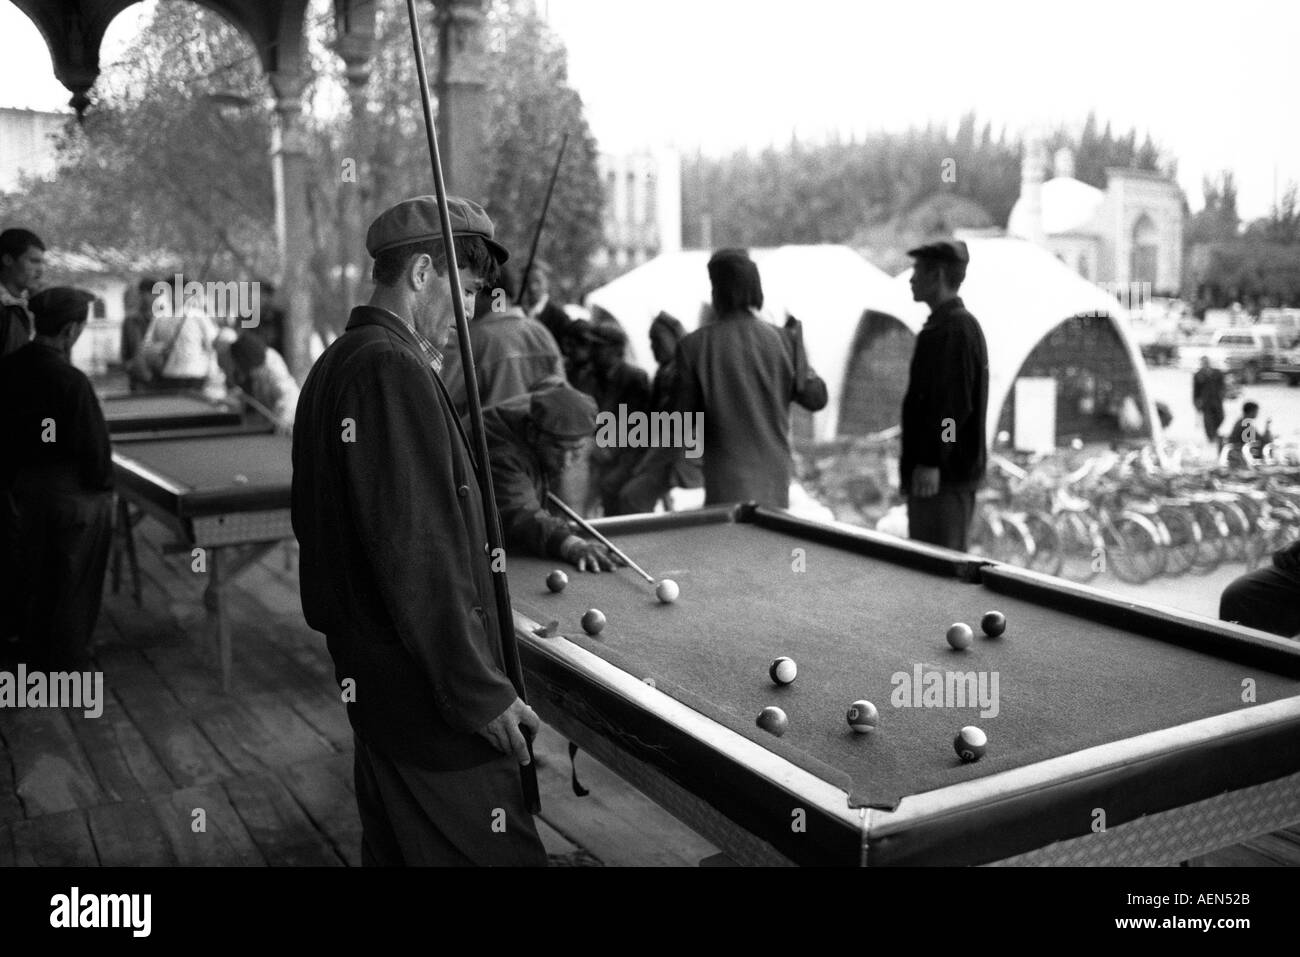 Unemployed Uygurs spend their time playing pool in the town of Kashgar, Xinjiang Province, Peoples Republic of China. Stock Photo